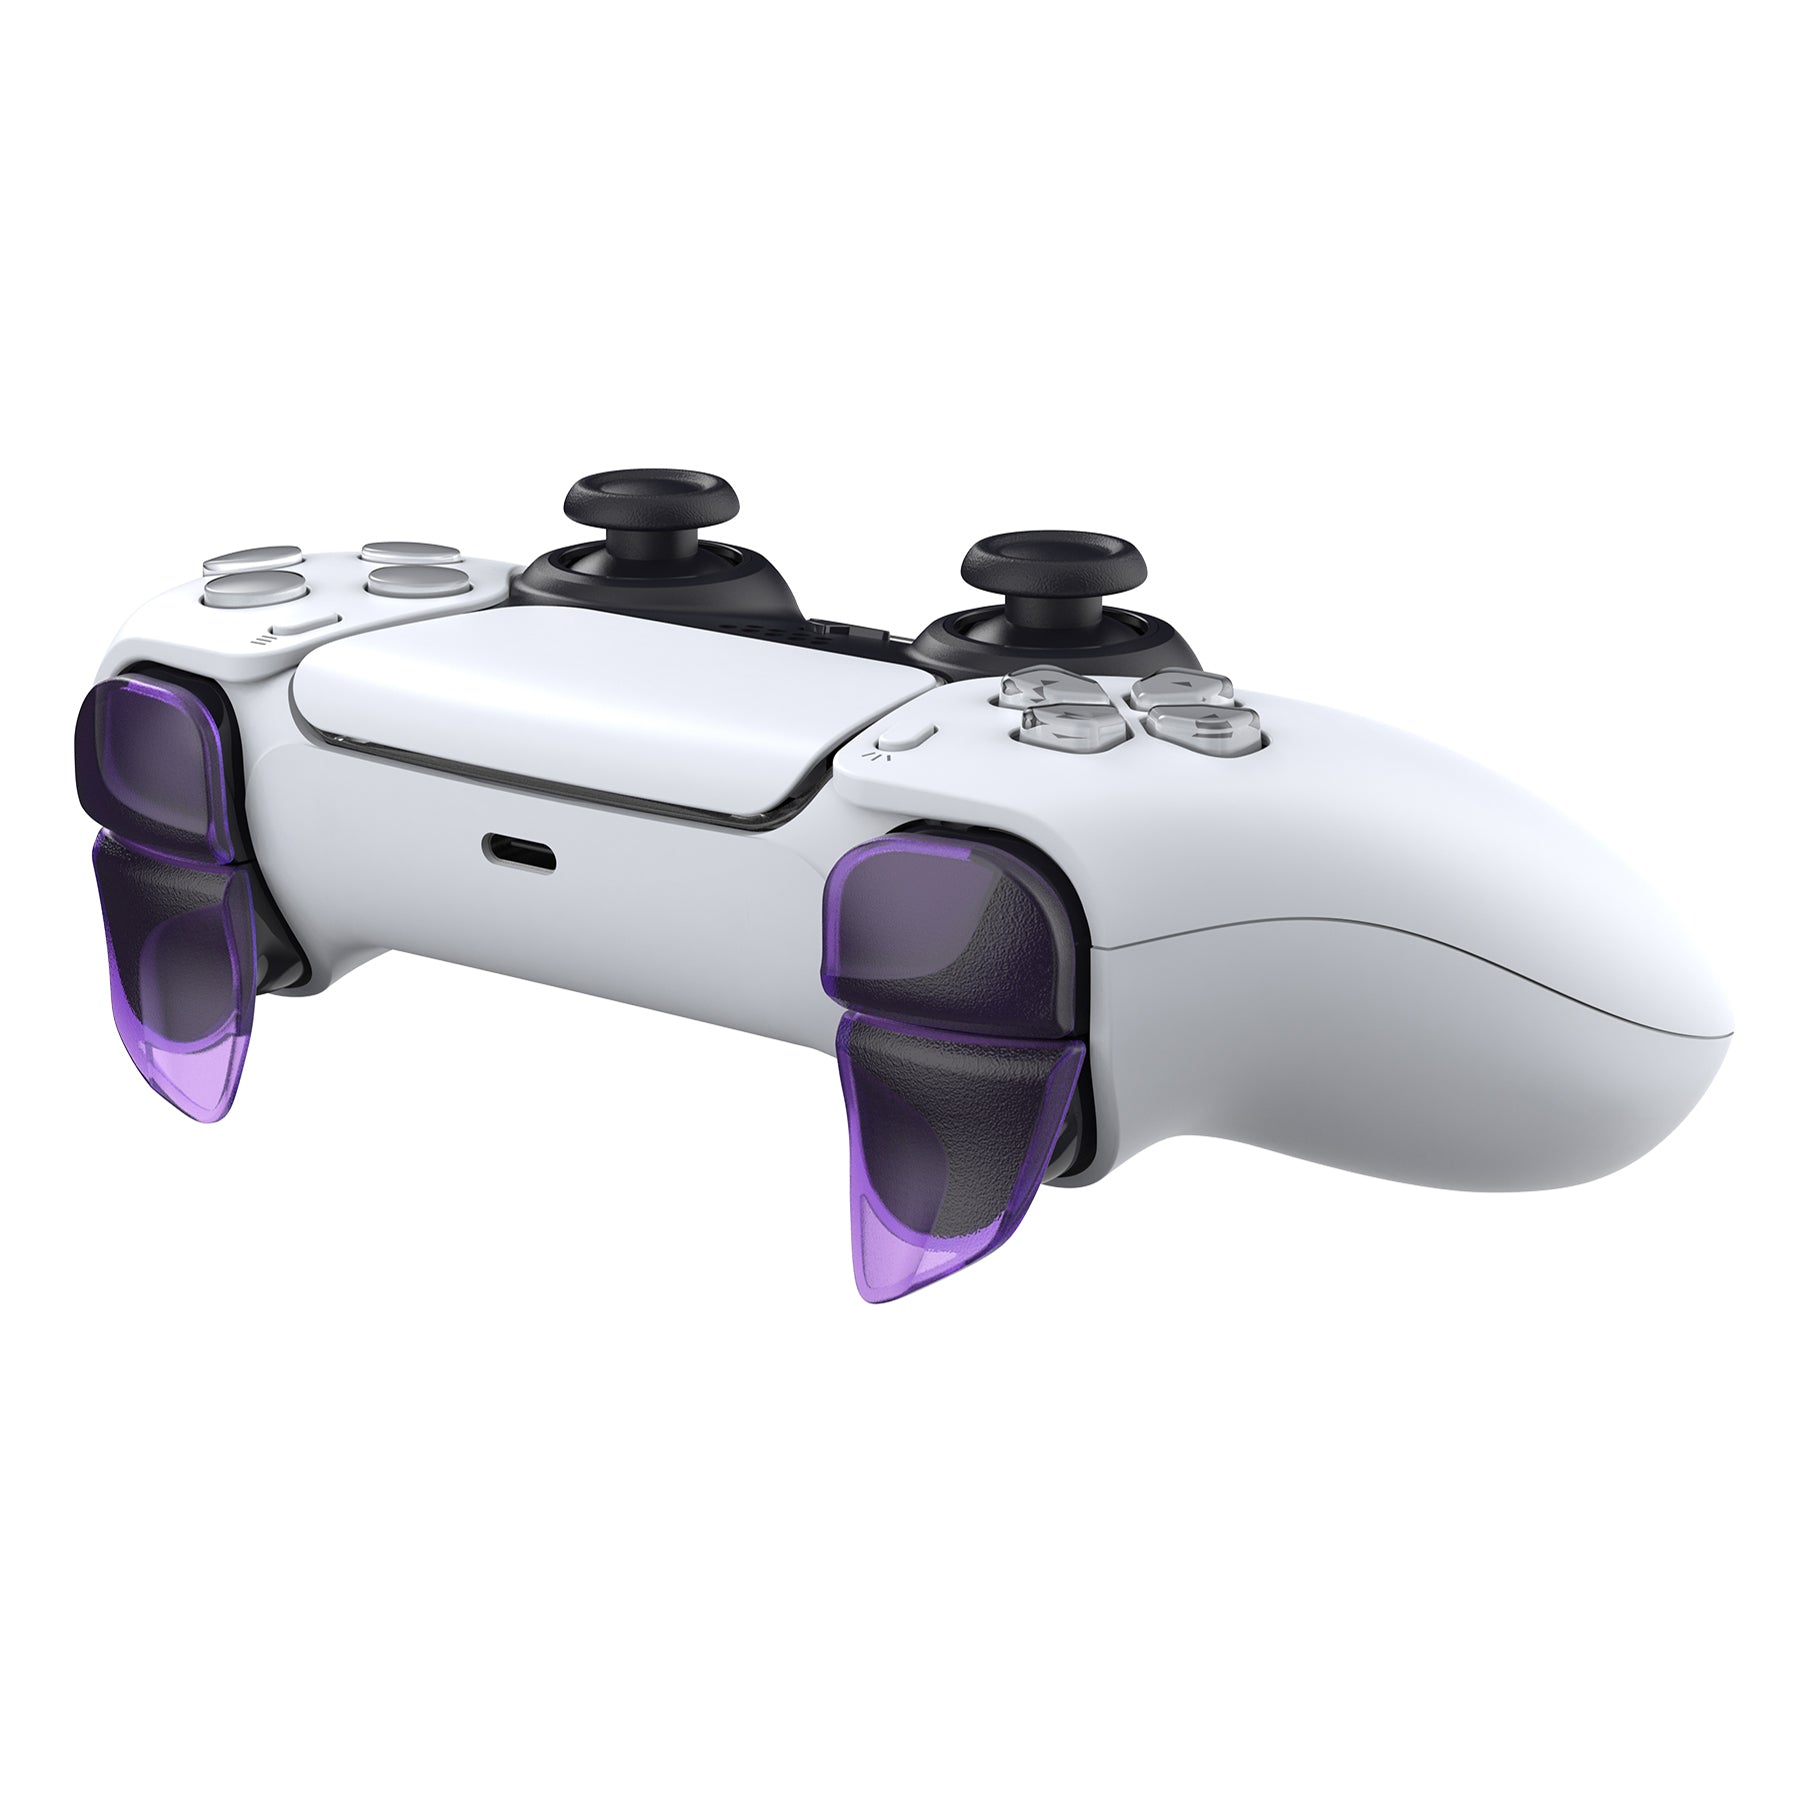 PlayVital Clear Atomic Purple 2 Pair Shoulder Buttons Extension Triggers for PS5 Controller, Game Improvement Adjusters for PS5 Controller, Bumper Trigger Extenders for PS5 Controller - PFPJ087 PlayVital